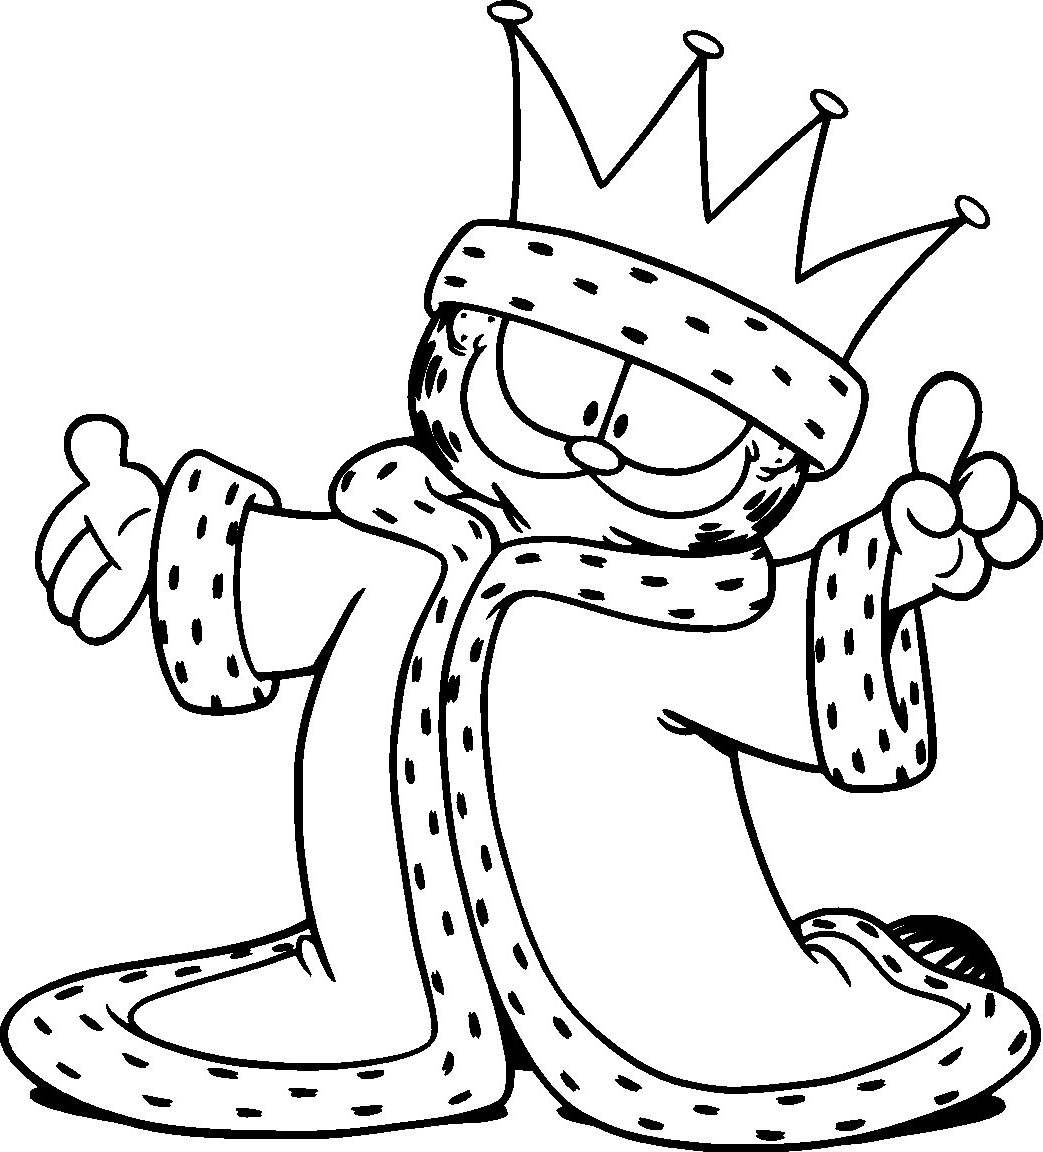 Free Awesome Garfield Coloring Pages Drawing Pictures printable